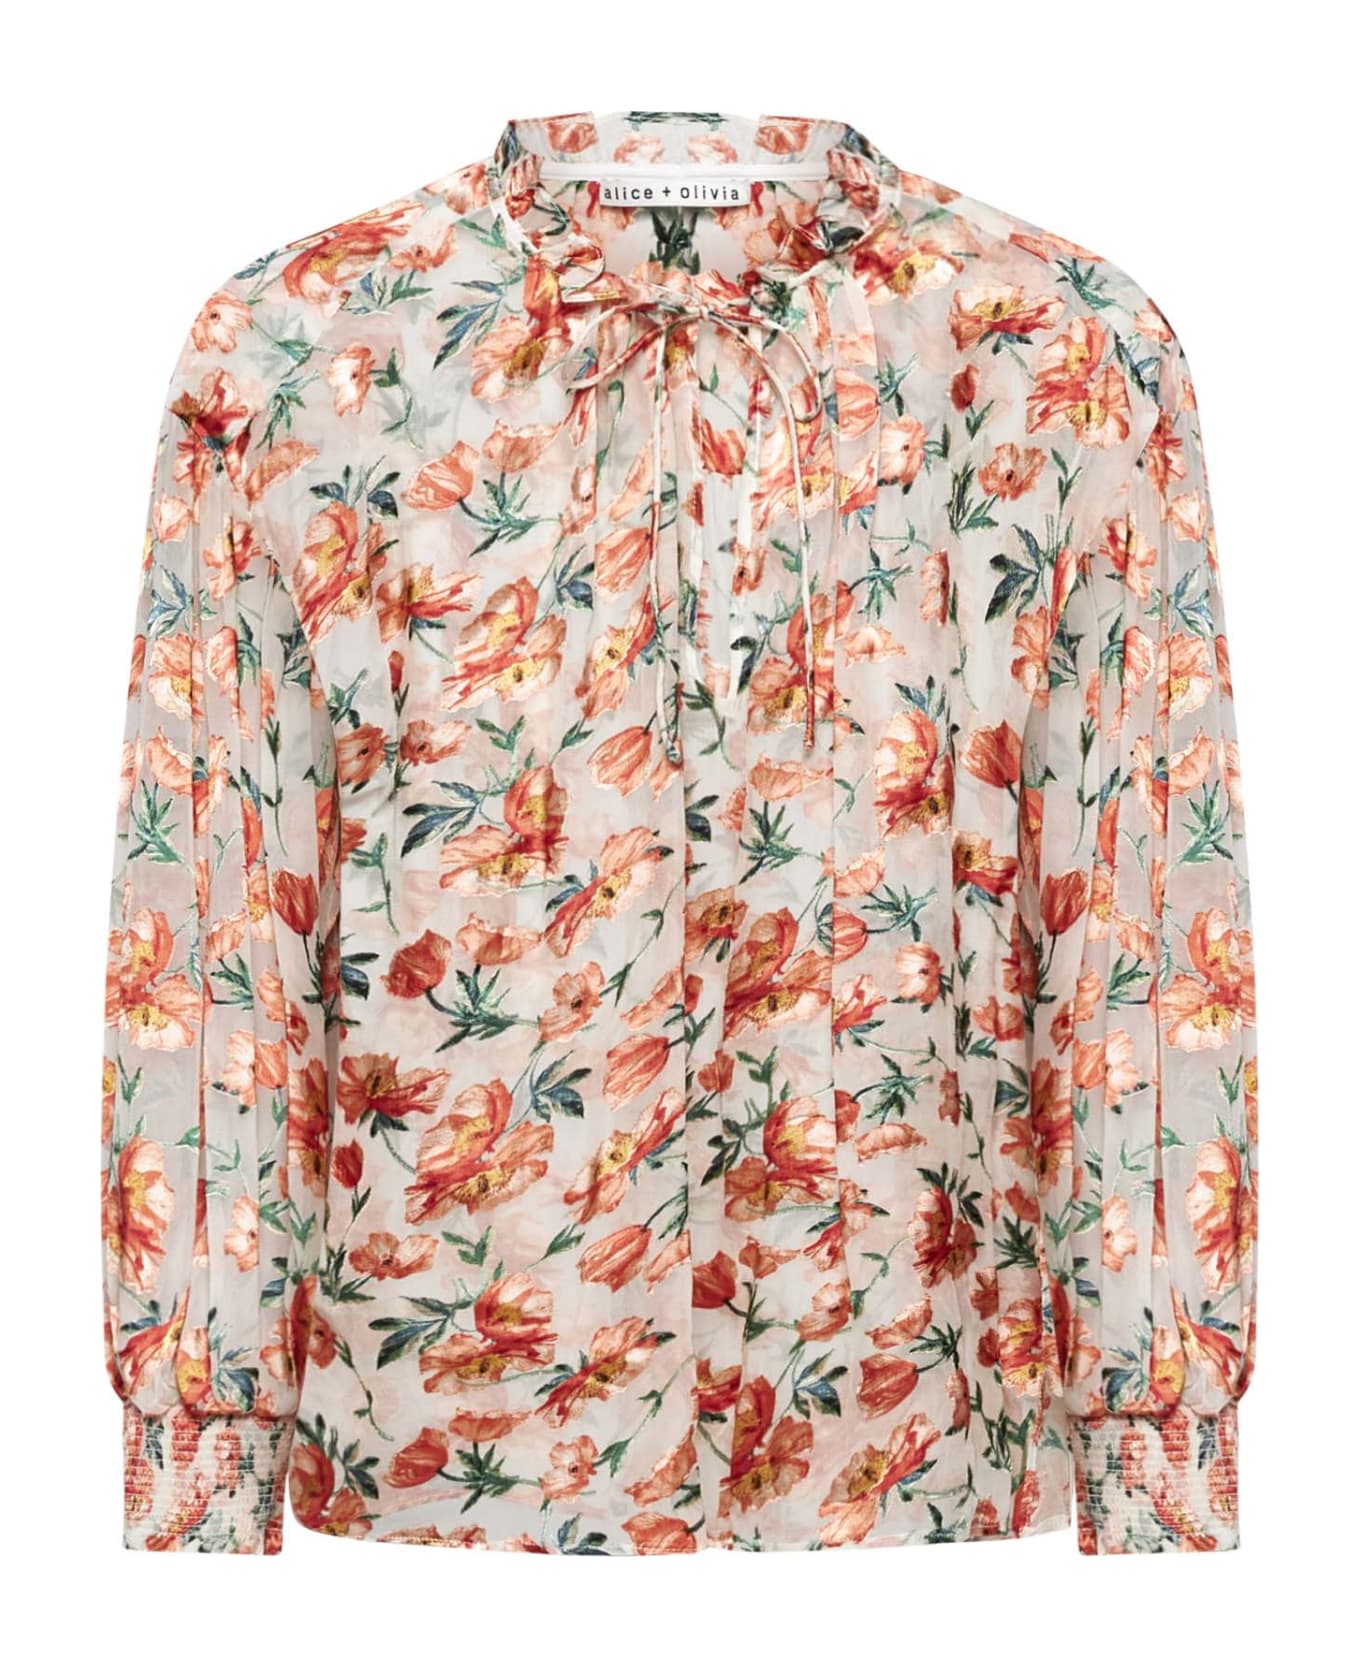 Alice + Olivia Shirt - Falling for you off white